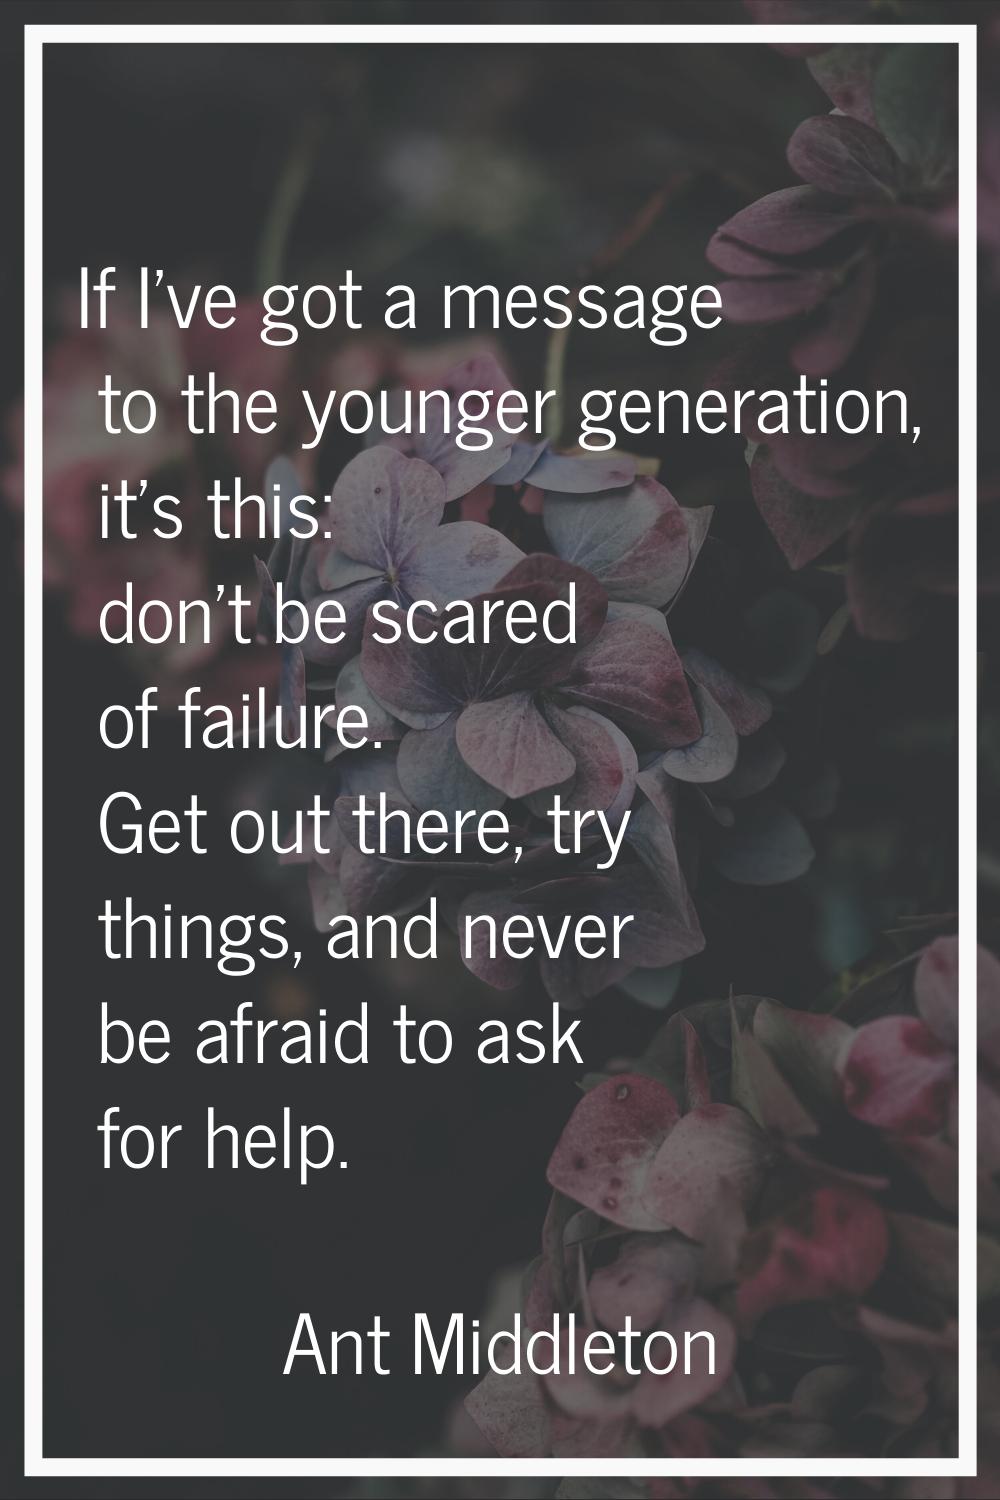 If I've got a message to the younger generation, it's this: don't be scared of failure. Get out the